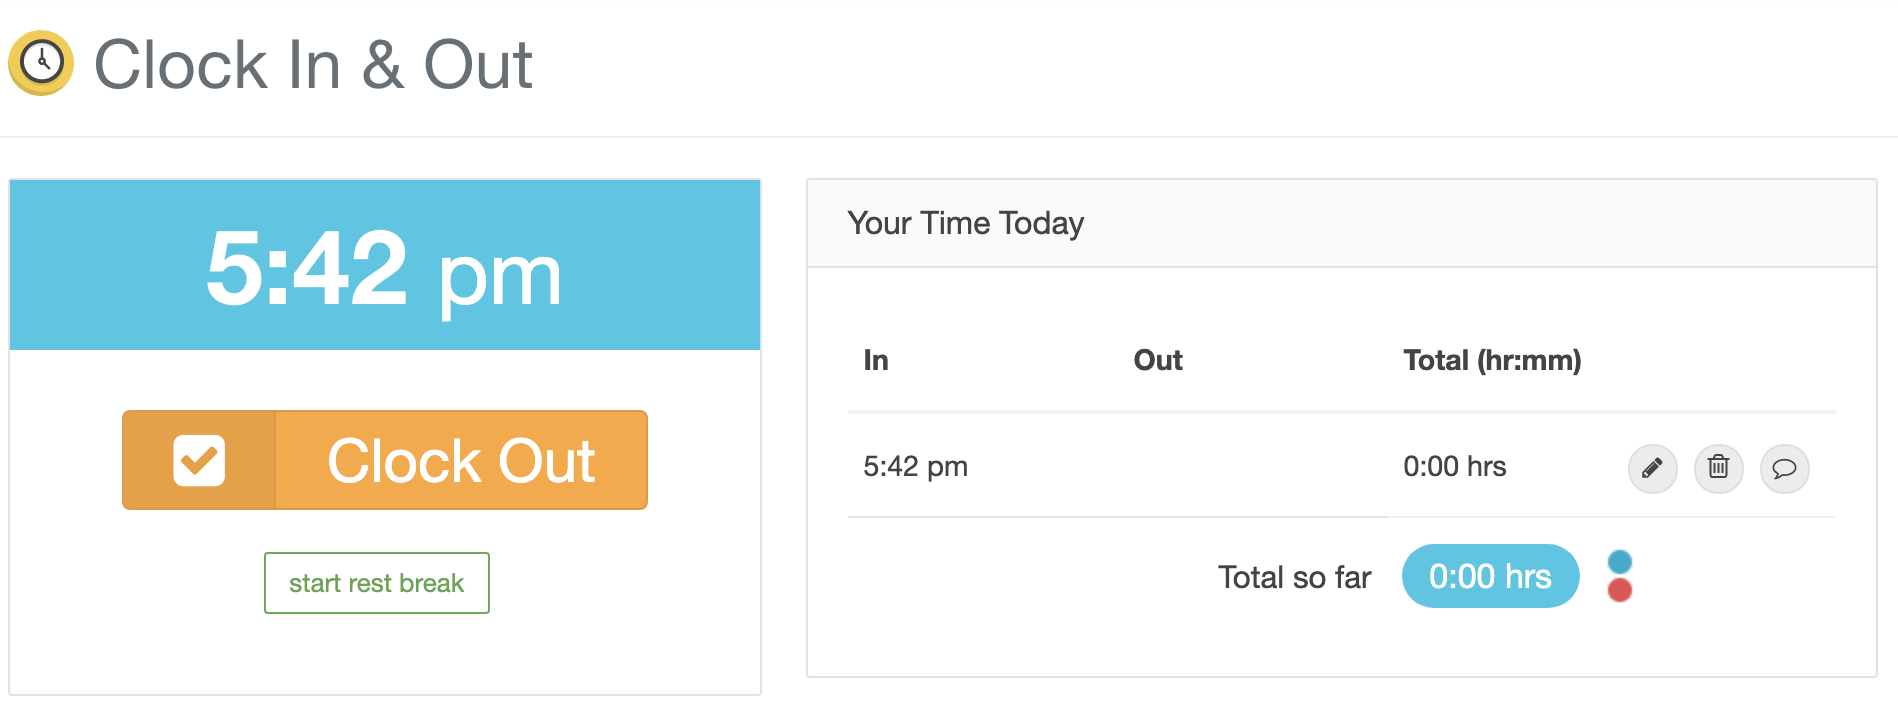 THE Employee Time Clock App for Small Businesses - IdeaBlox